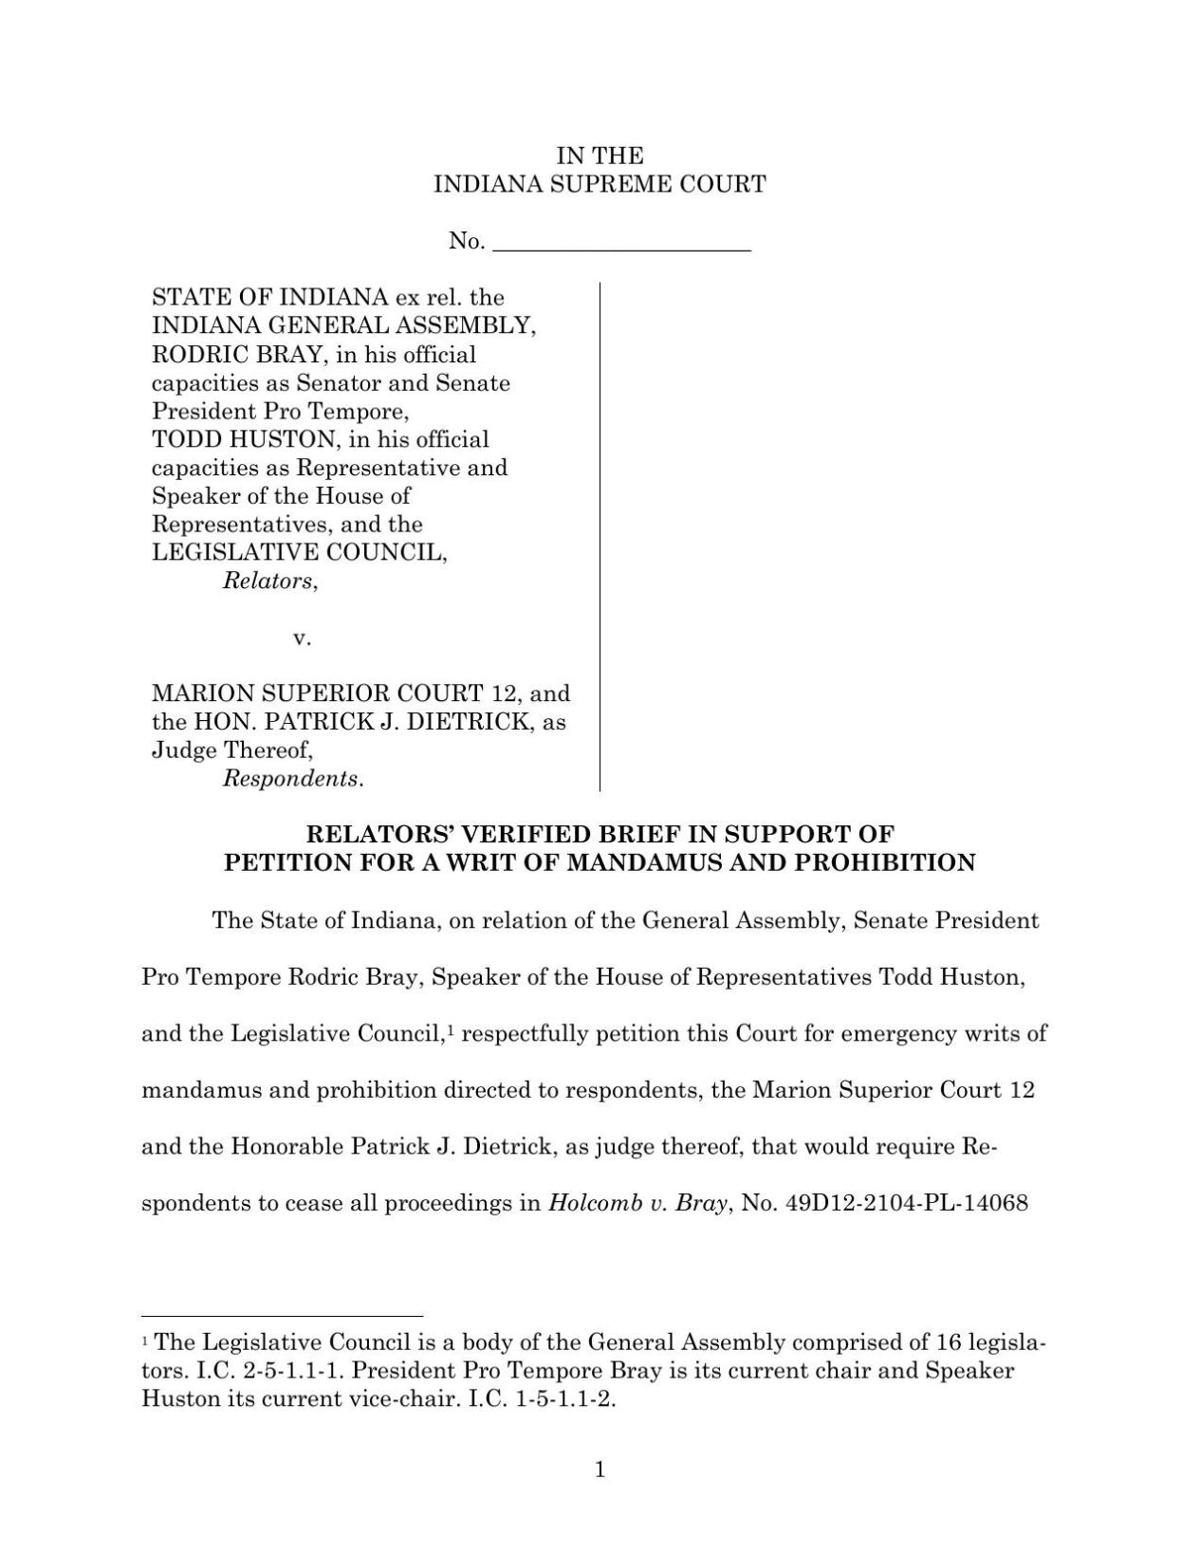 Attorney general's request for writ of mandamus